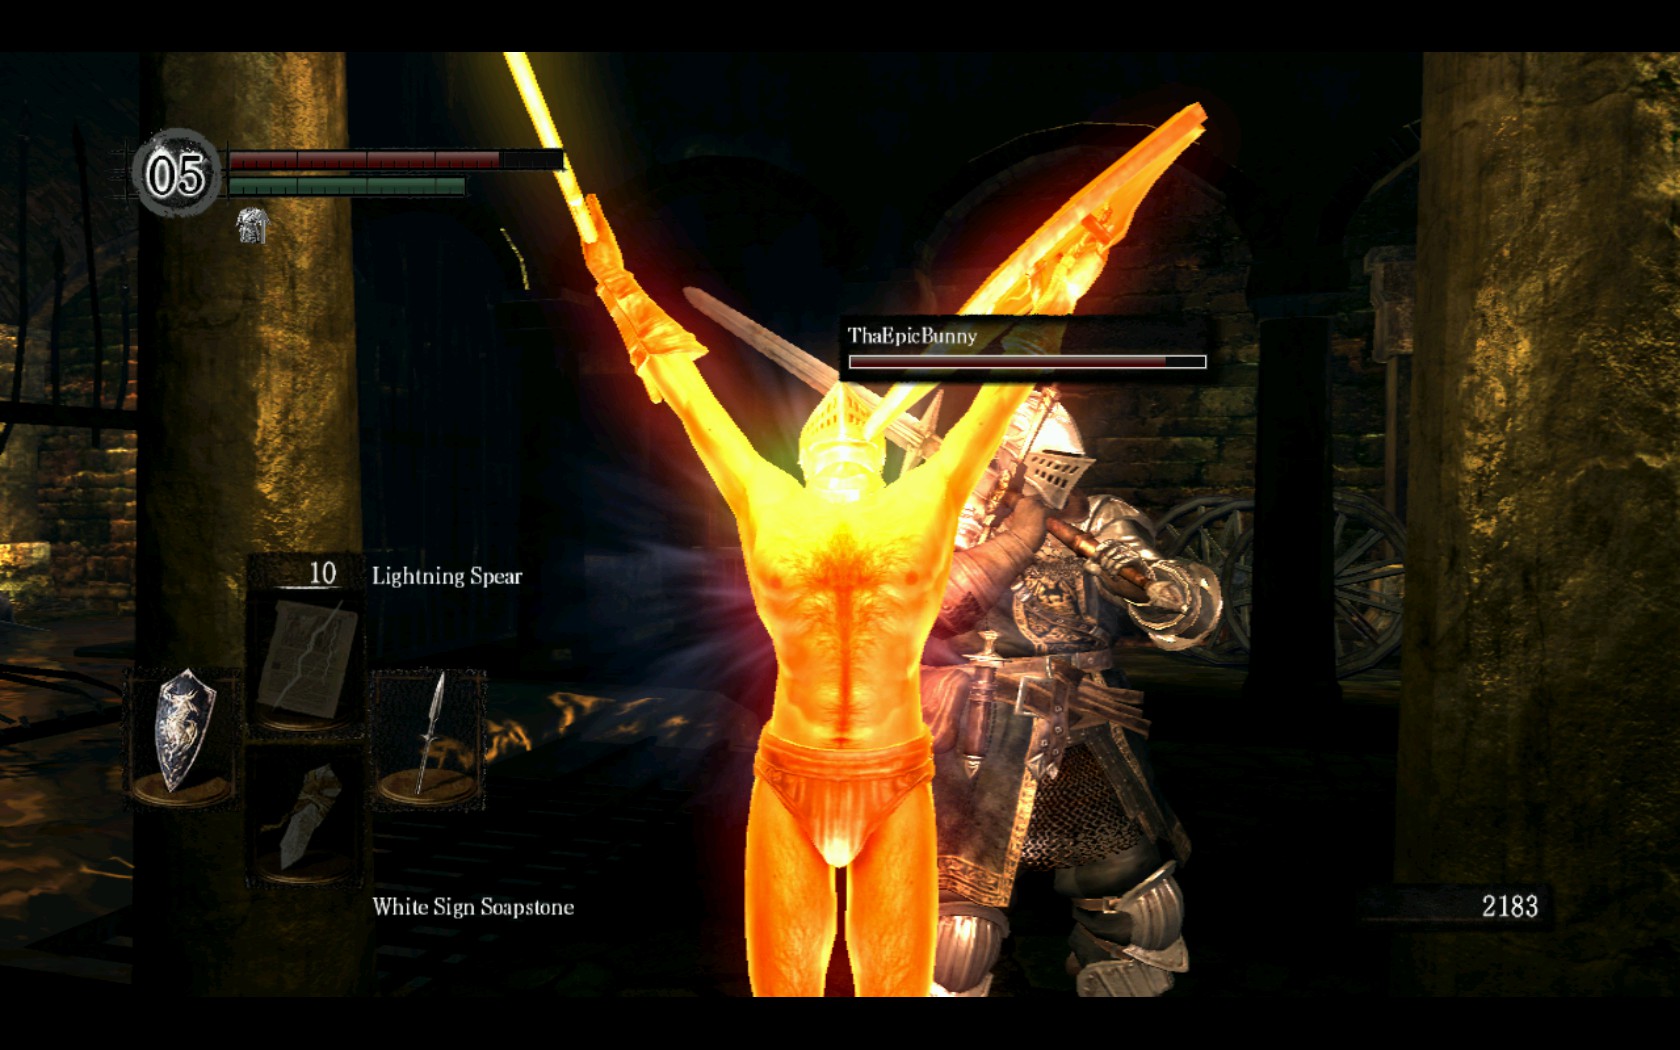 praise the sun wallpaper,pc game,action adventure game,darkness,screenshot,video game software